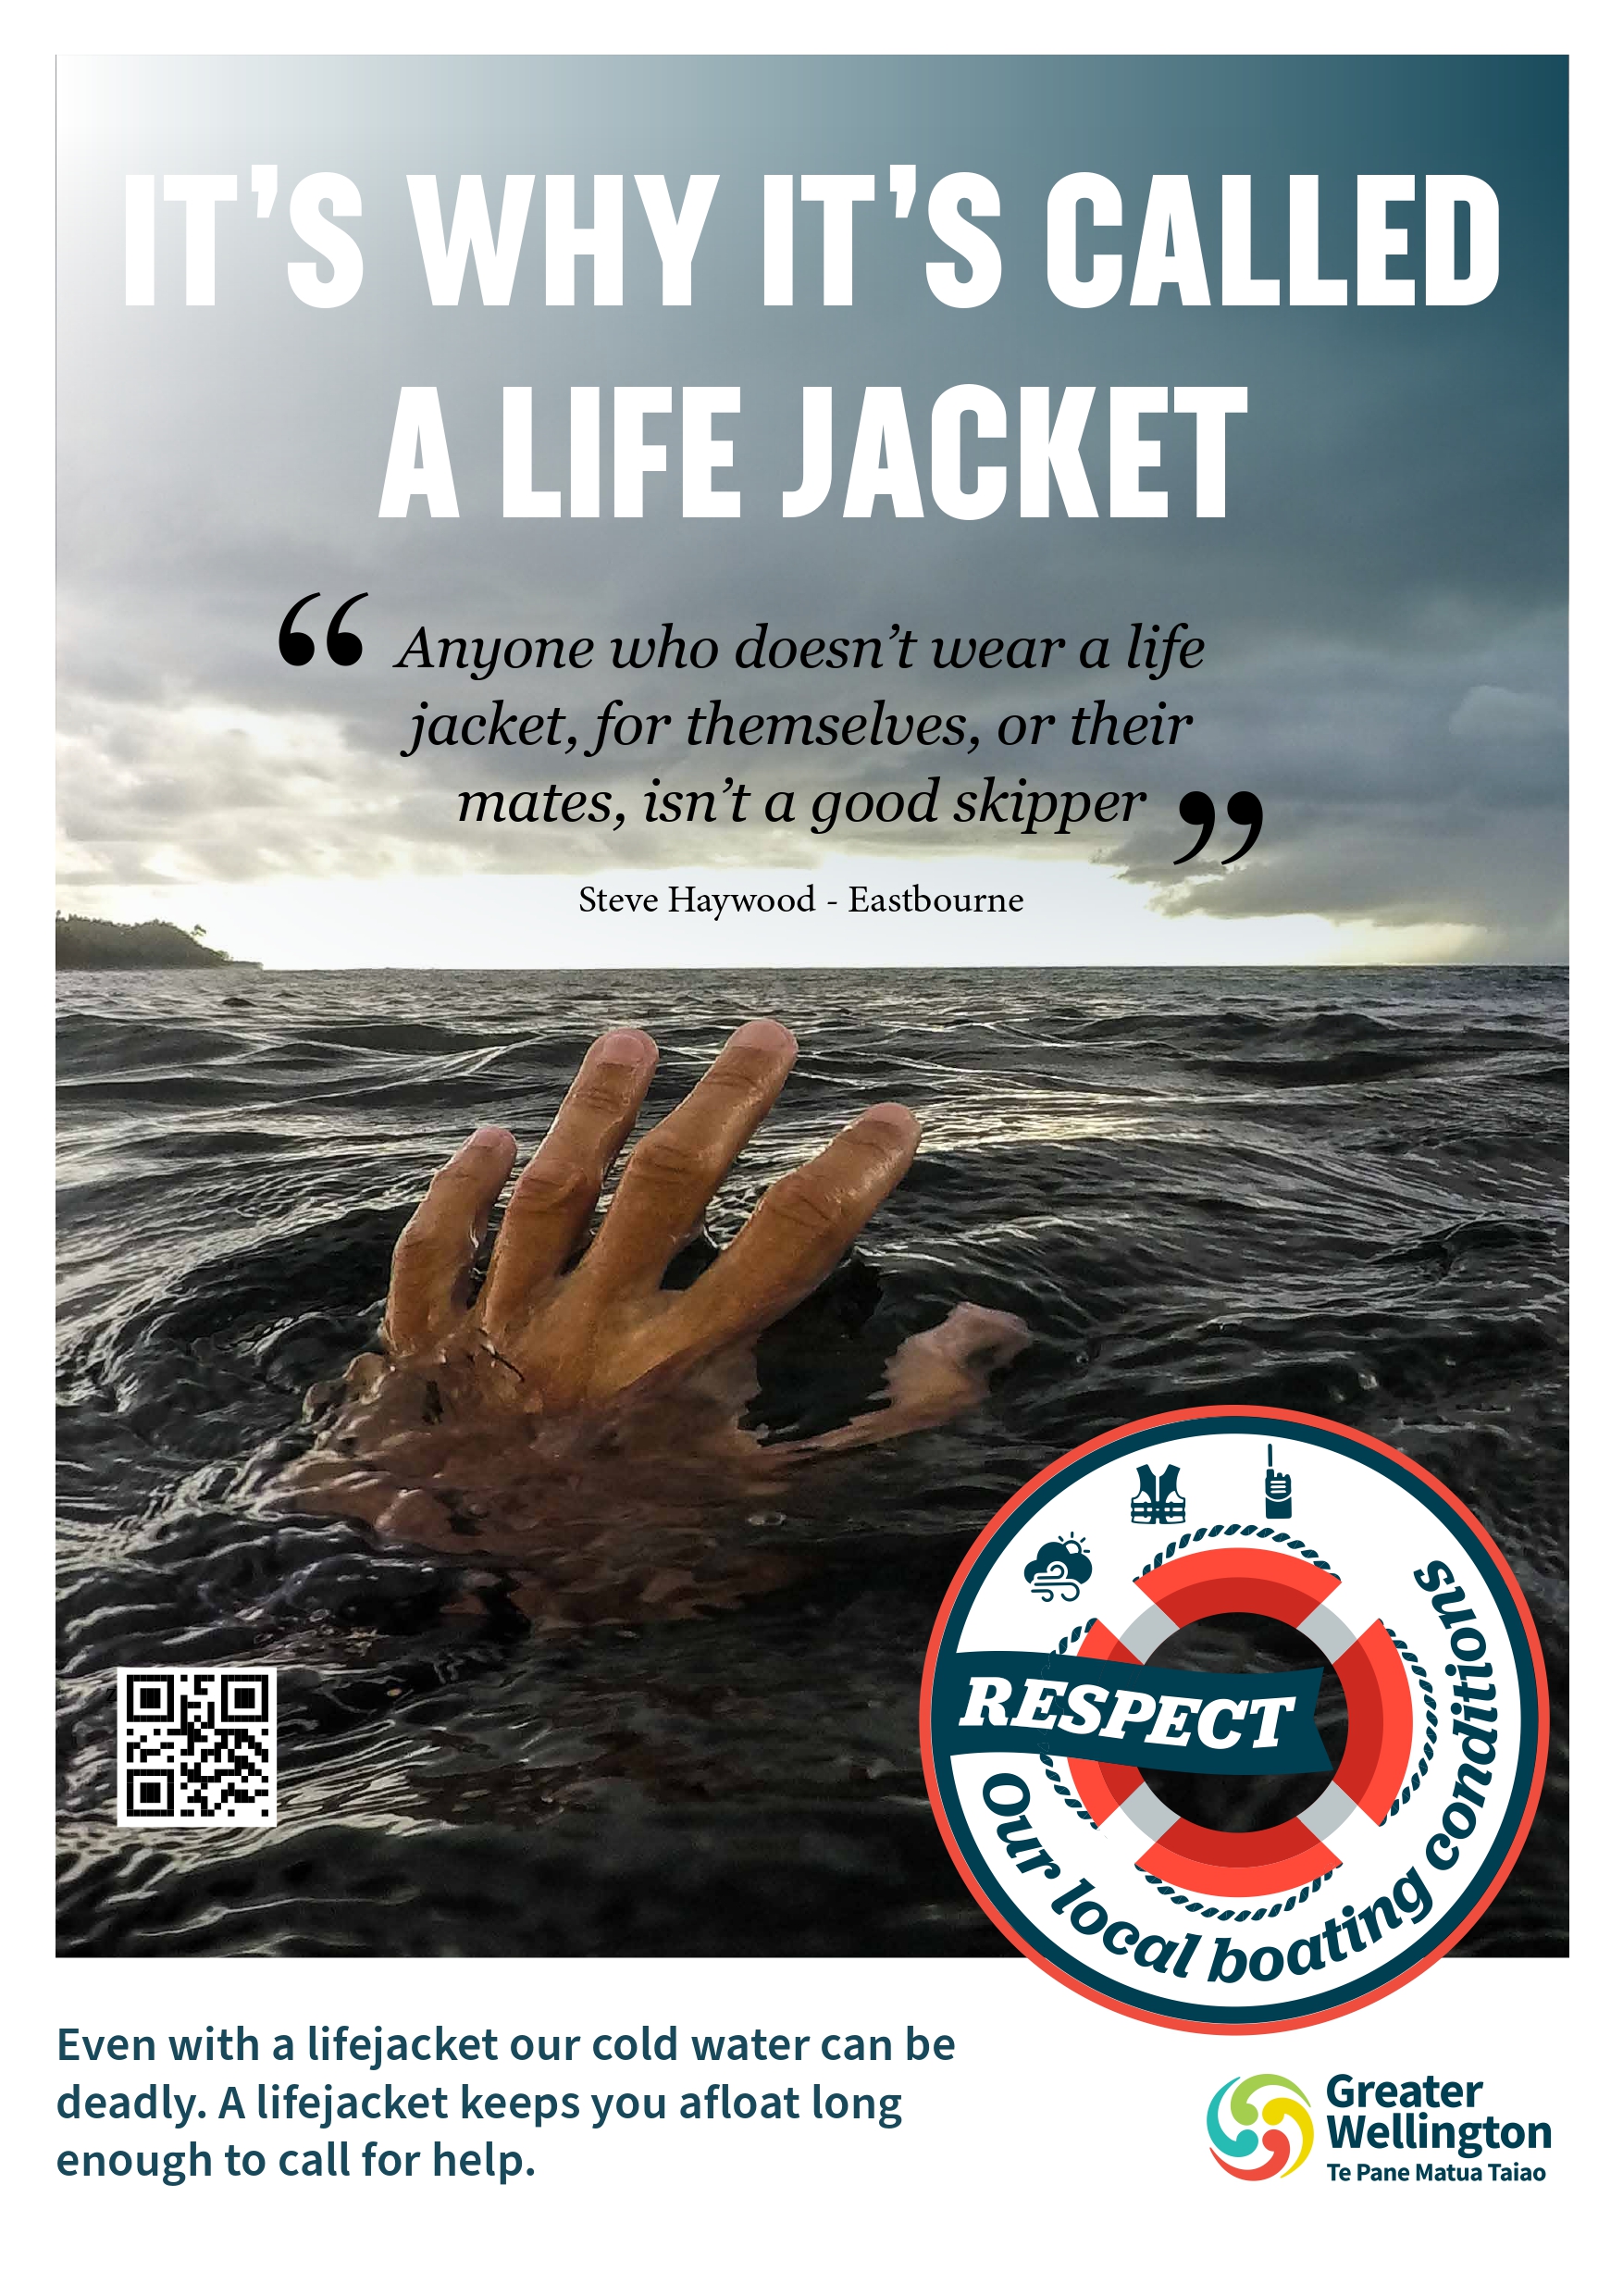 It's why it's called a life jacket